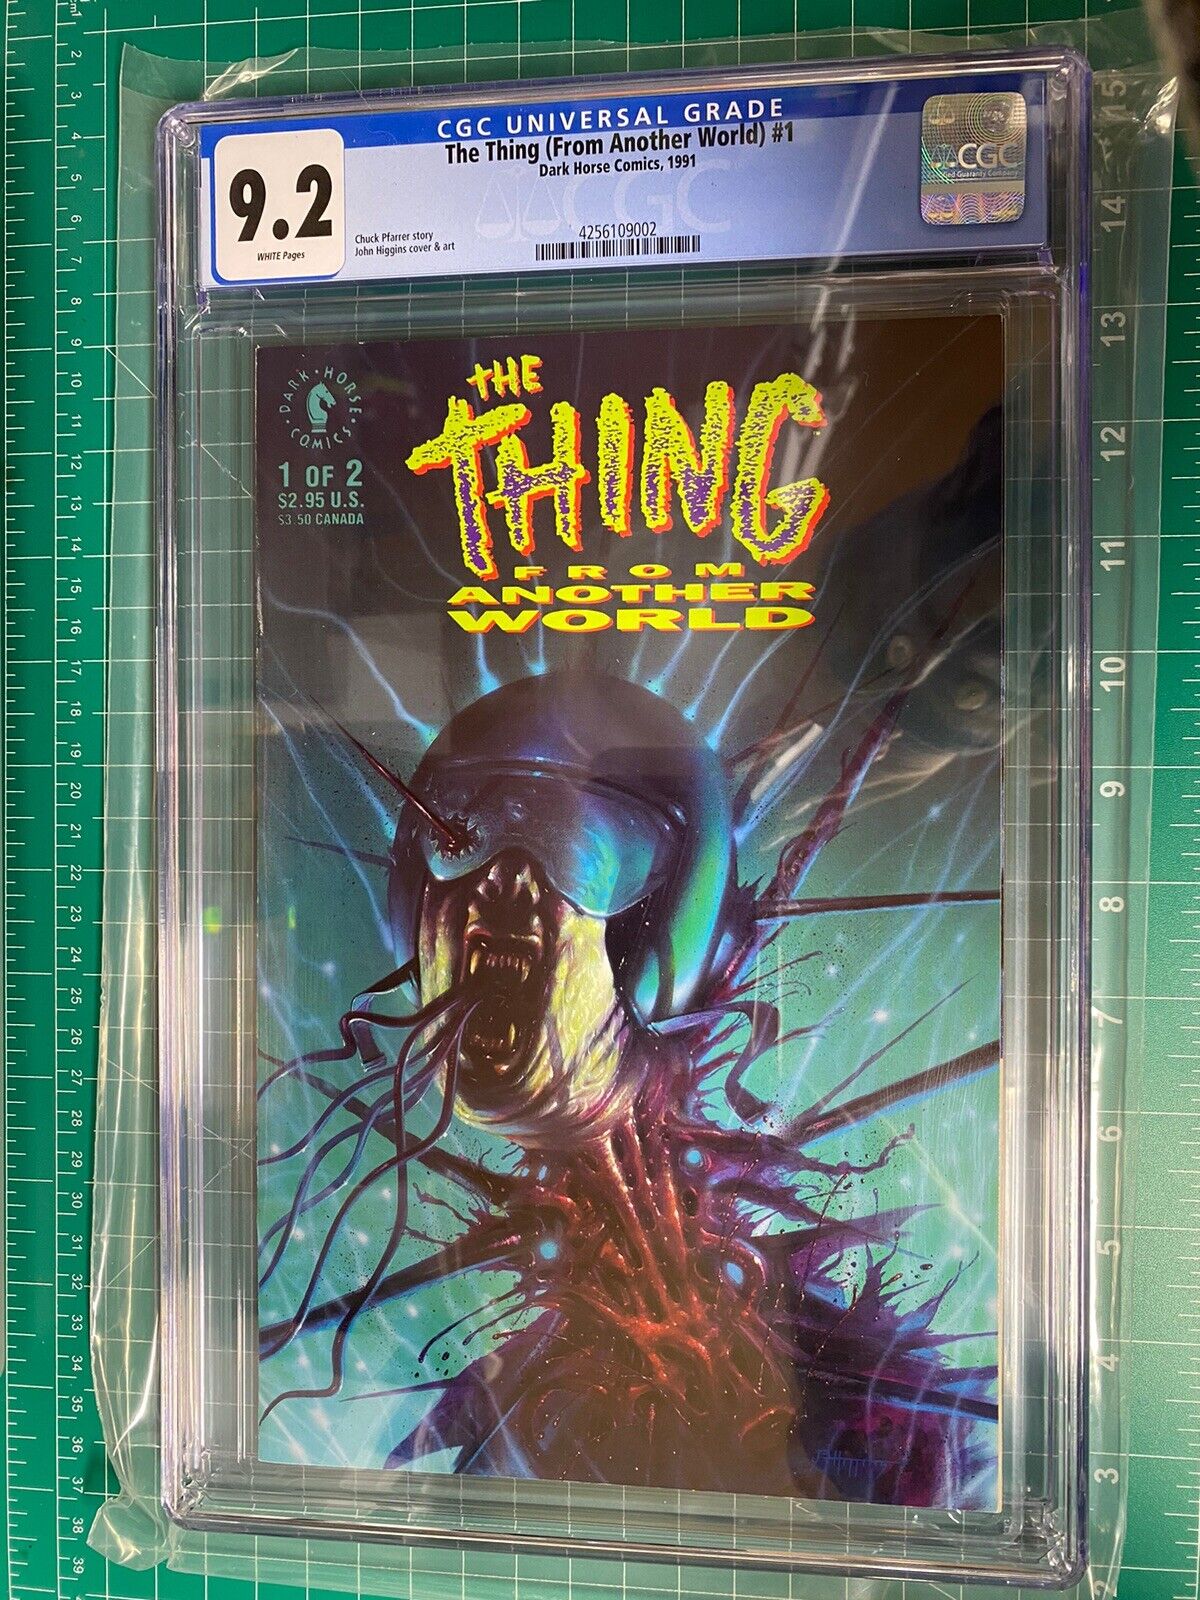 The Thing (From Another World) #1 CGC 9.2 NM- WHITE PAGES